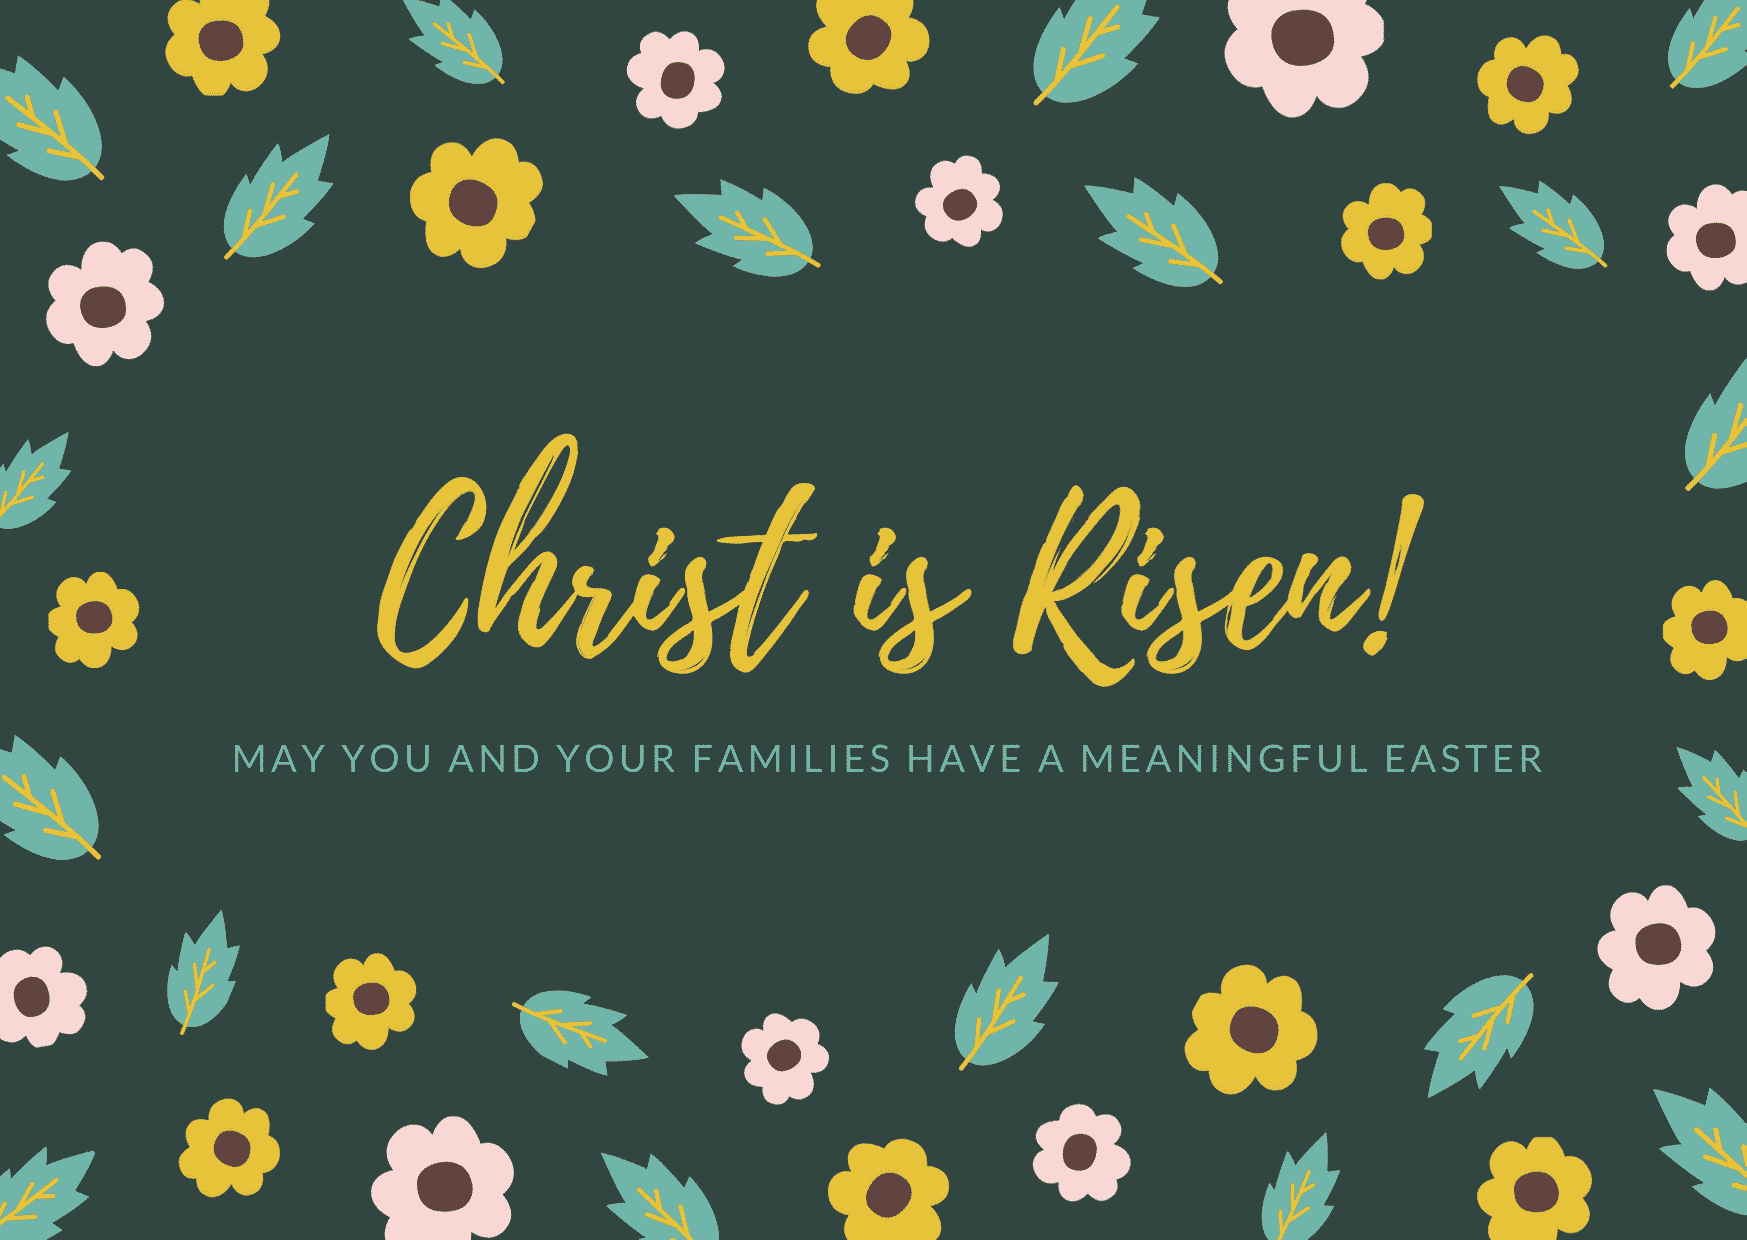 Christian Academy School System | Happy Easter | Christ is Risen!